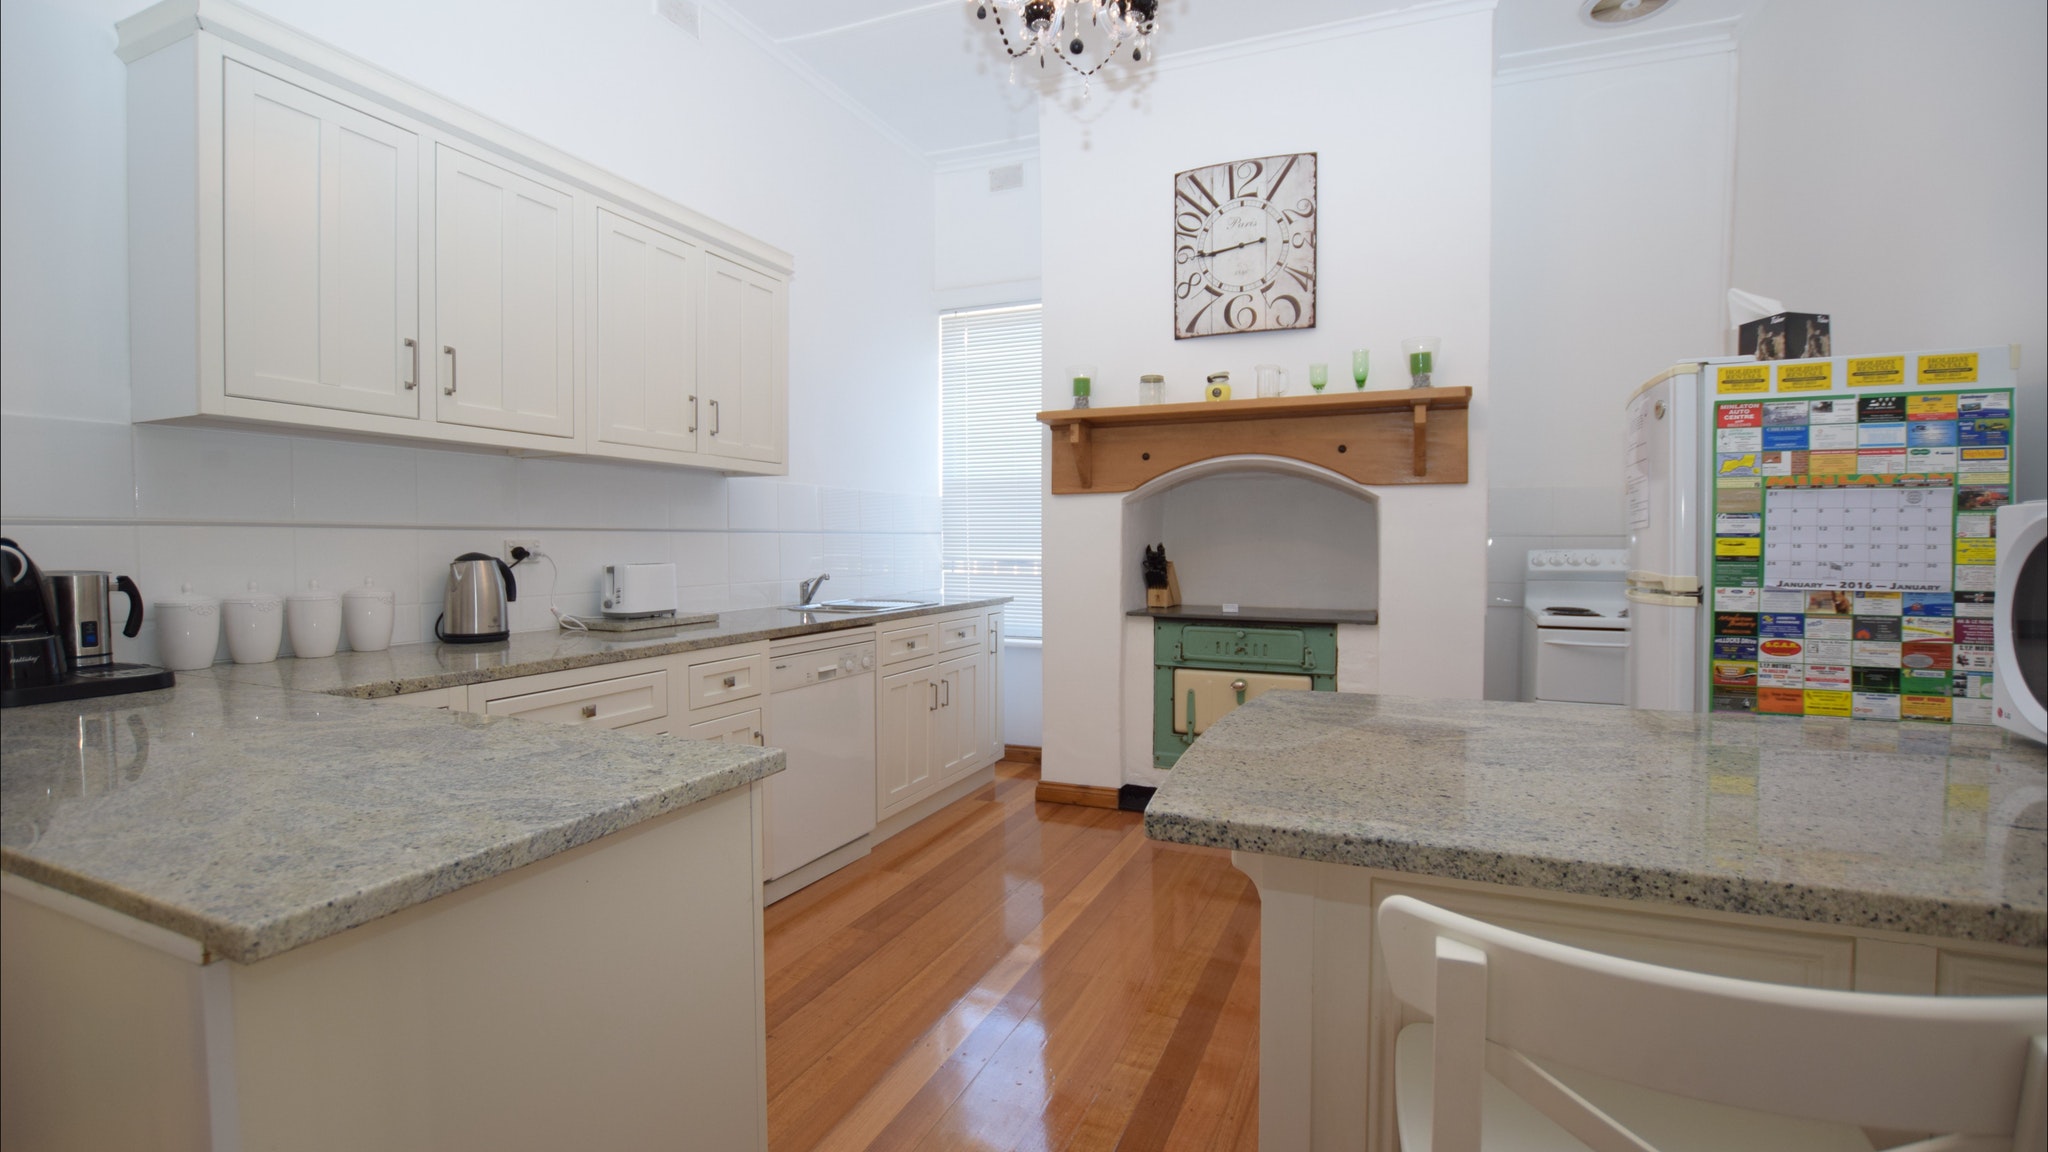 The Provincial Bed  Breakfast - Coogee Beach Accommodation